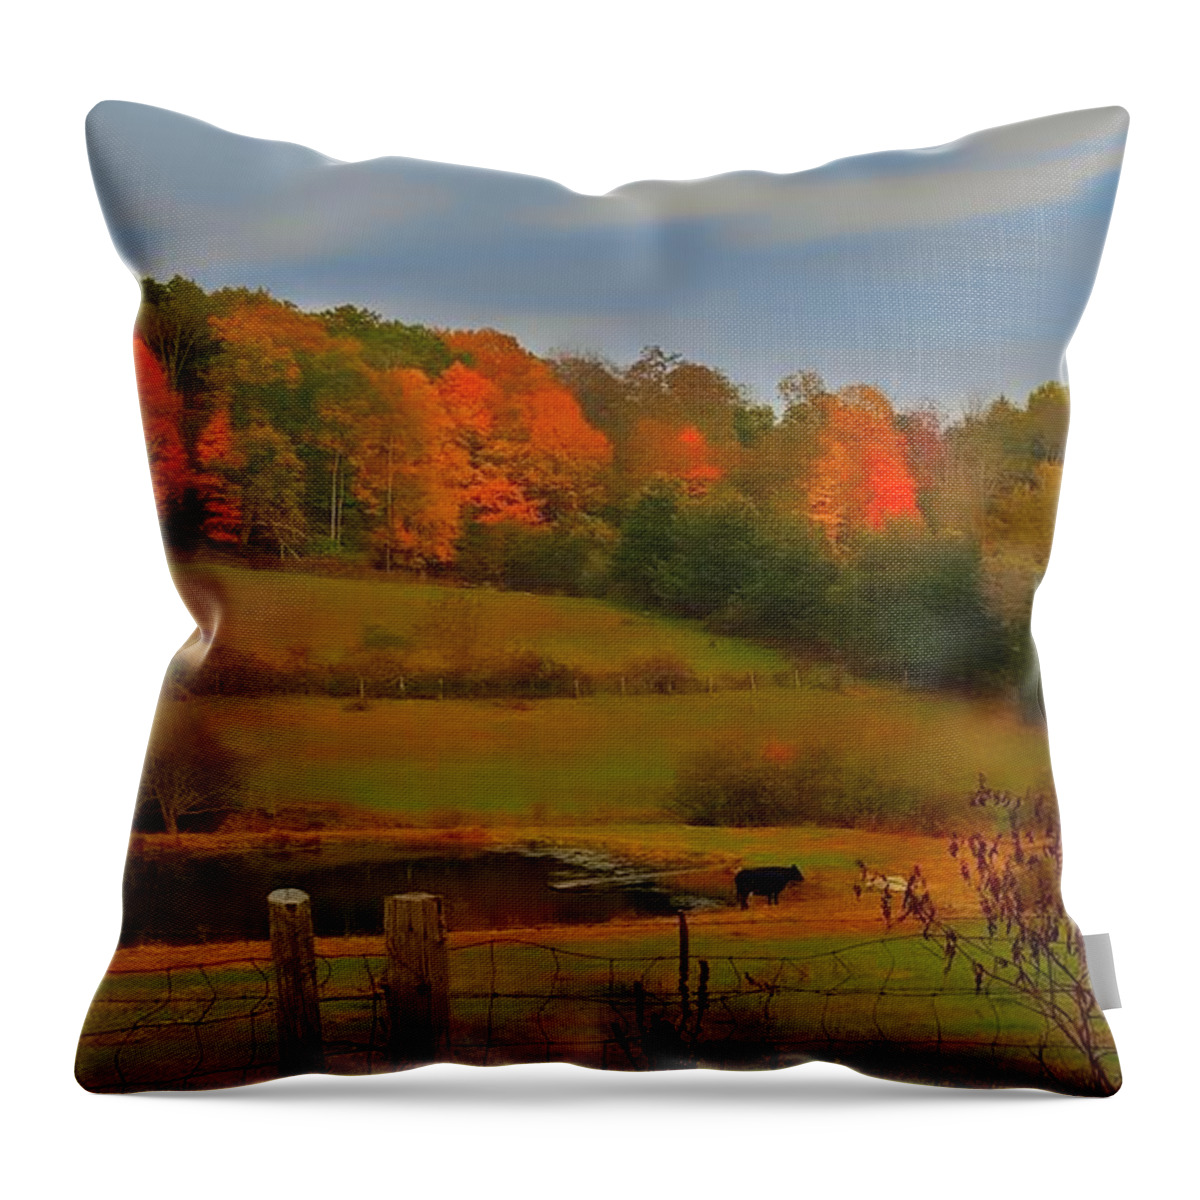 Autumn Throw Pillow featuring the photograph Lucky Cow by Dani McEvoy